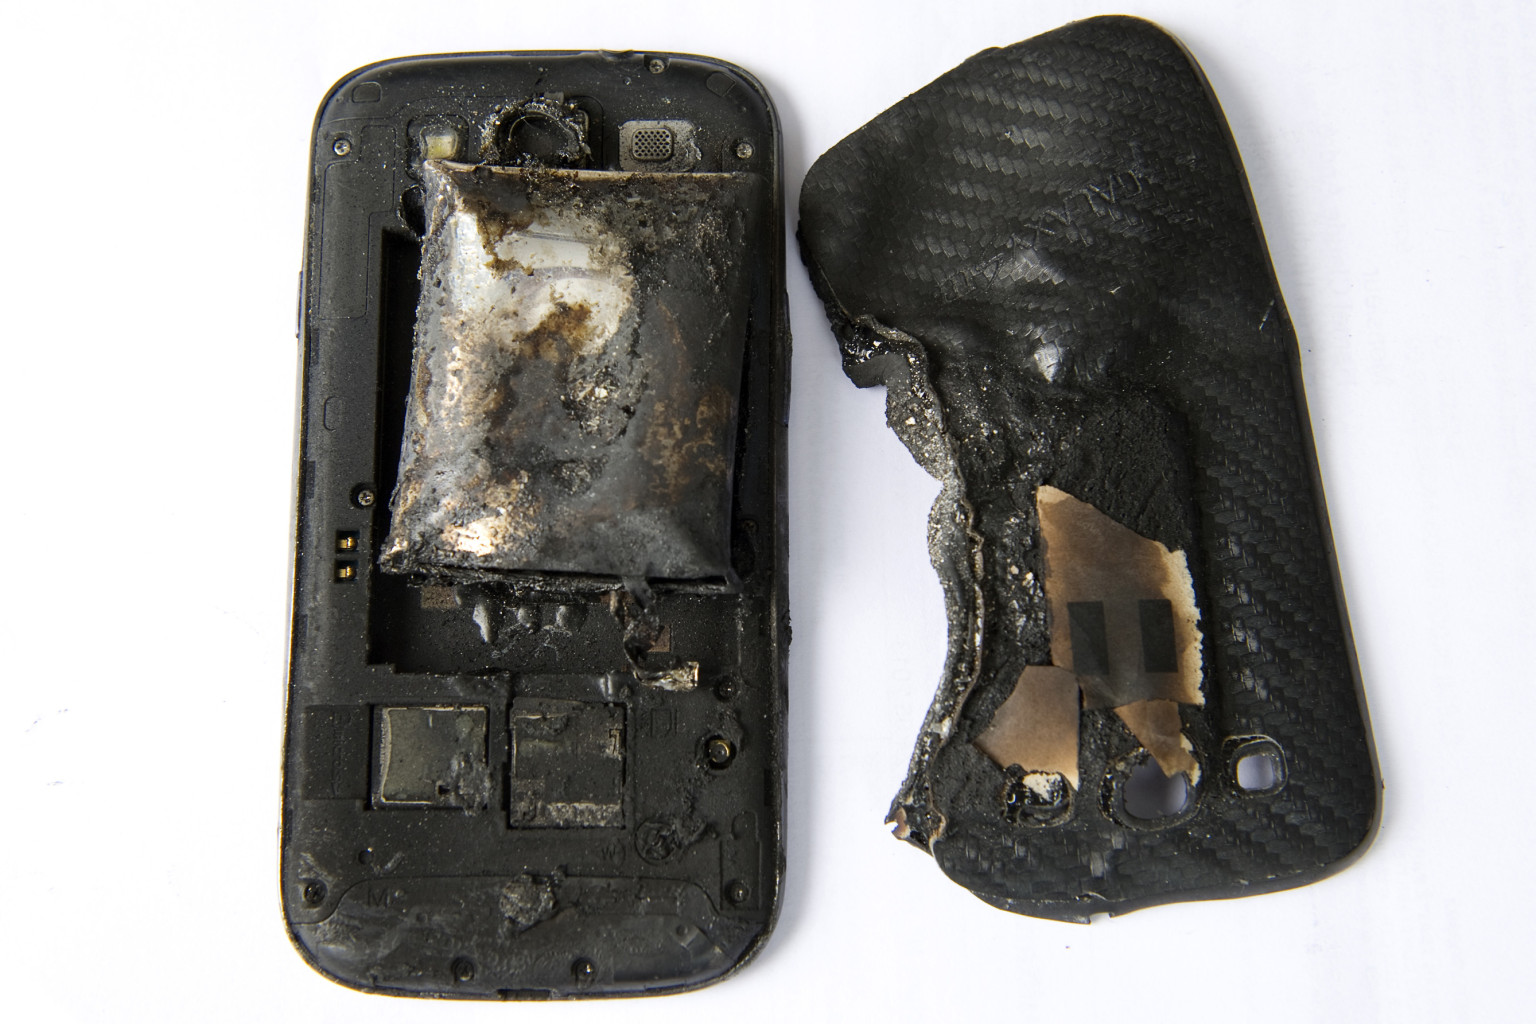 o-GALAXY-S3-MELTED-EXPLODED-PHONE-facebook.jpg